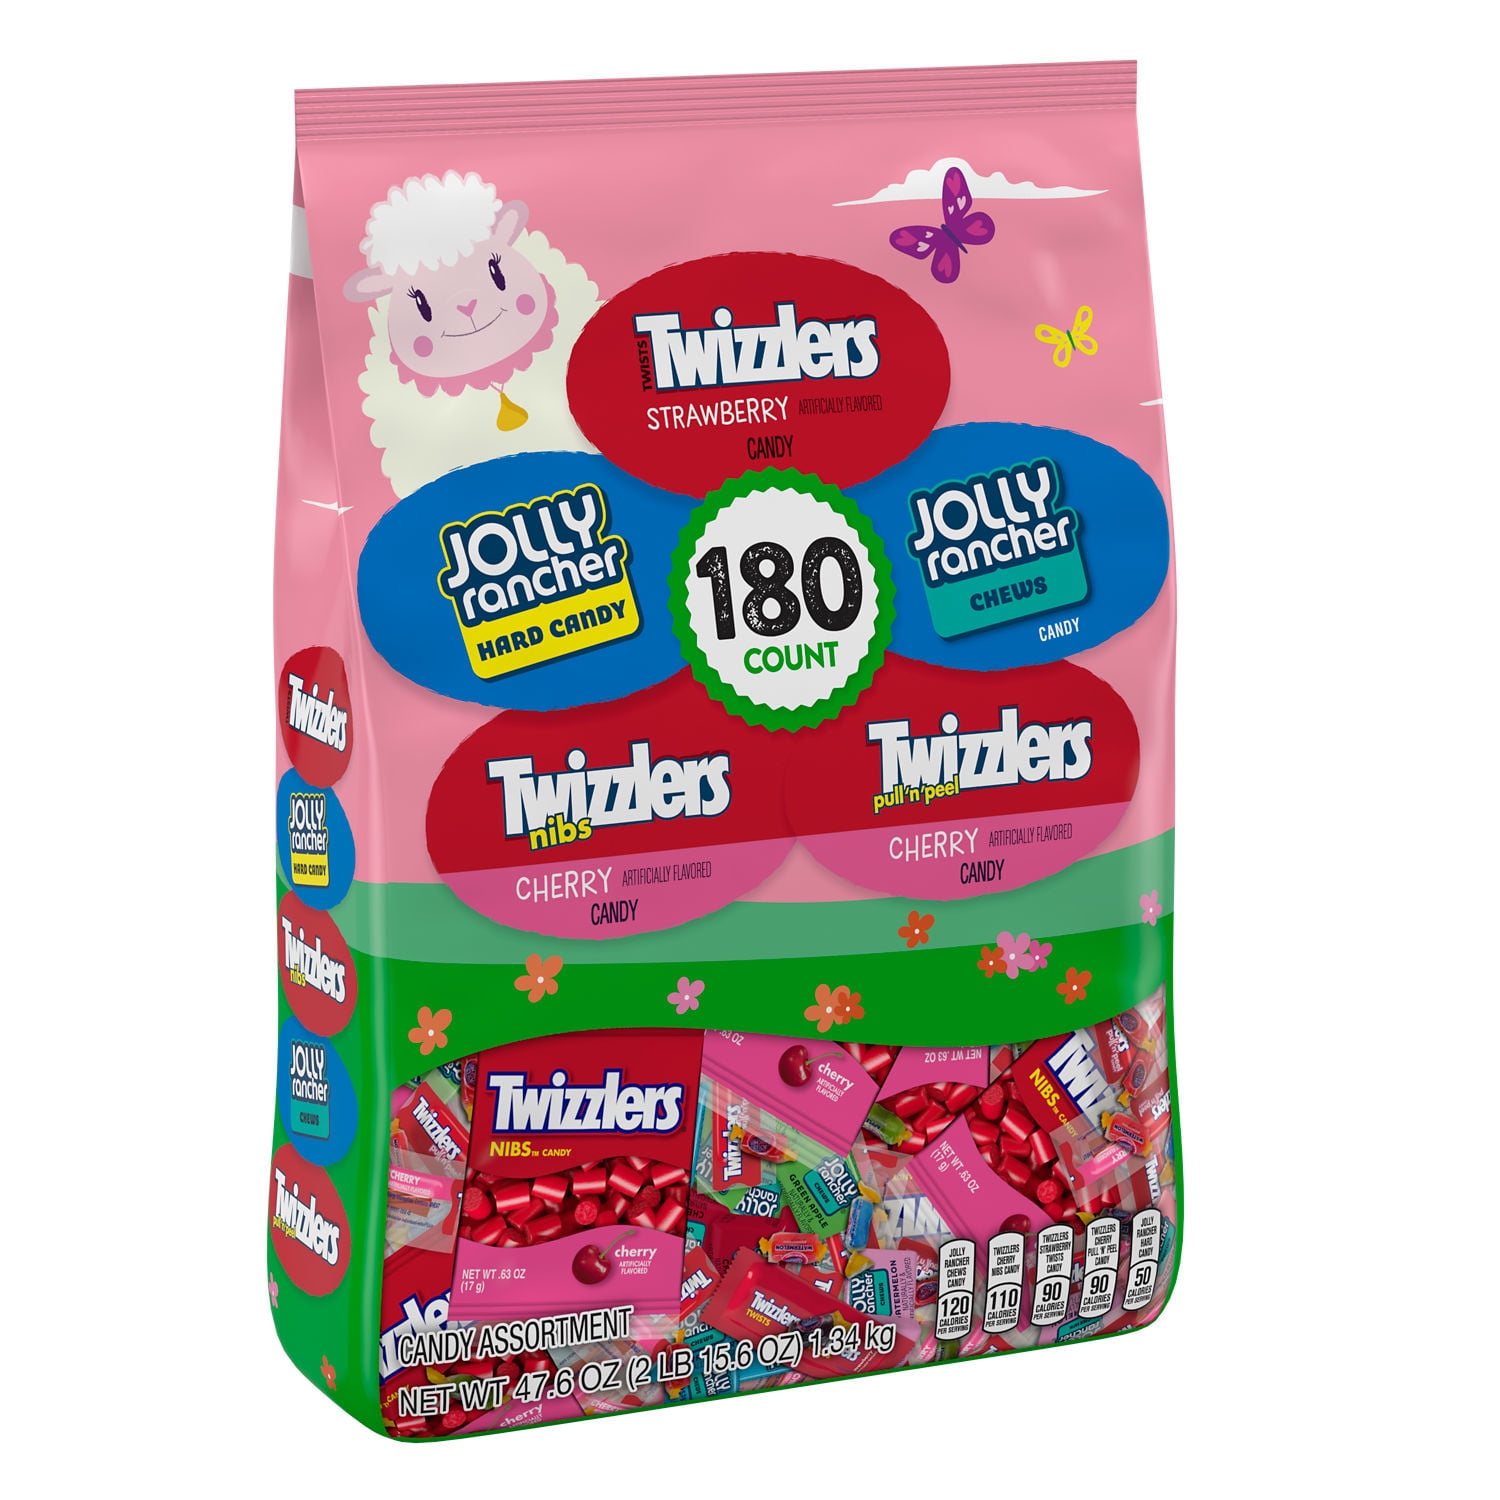 TWIZZLERS and JOLLY RANCHER, Fruit Flavored Assortment Treats, Easter Candy, 47.6 oz, Bulk Variety Bag (180 Pieces)